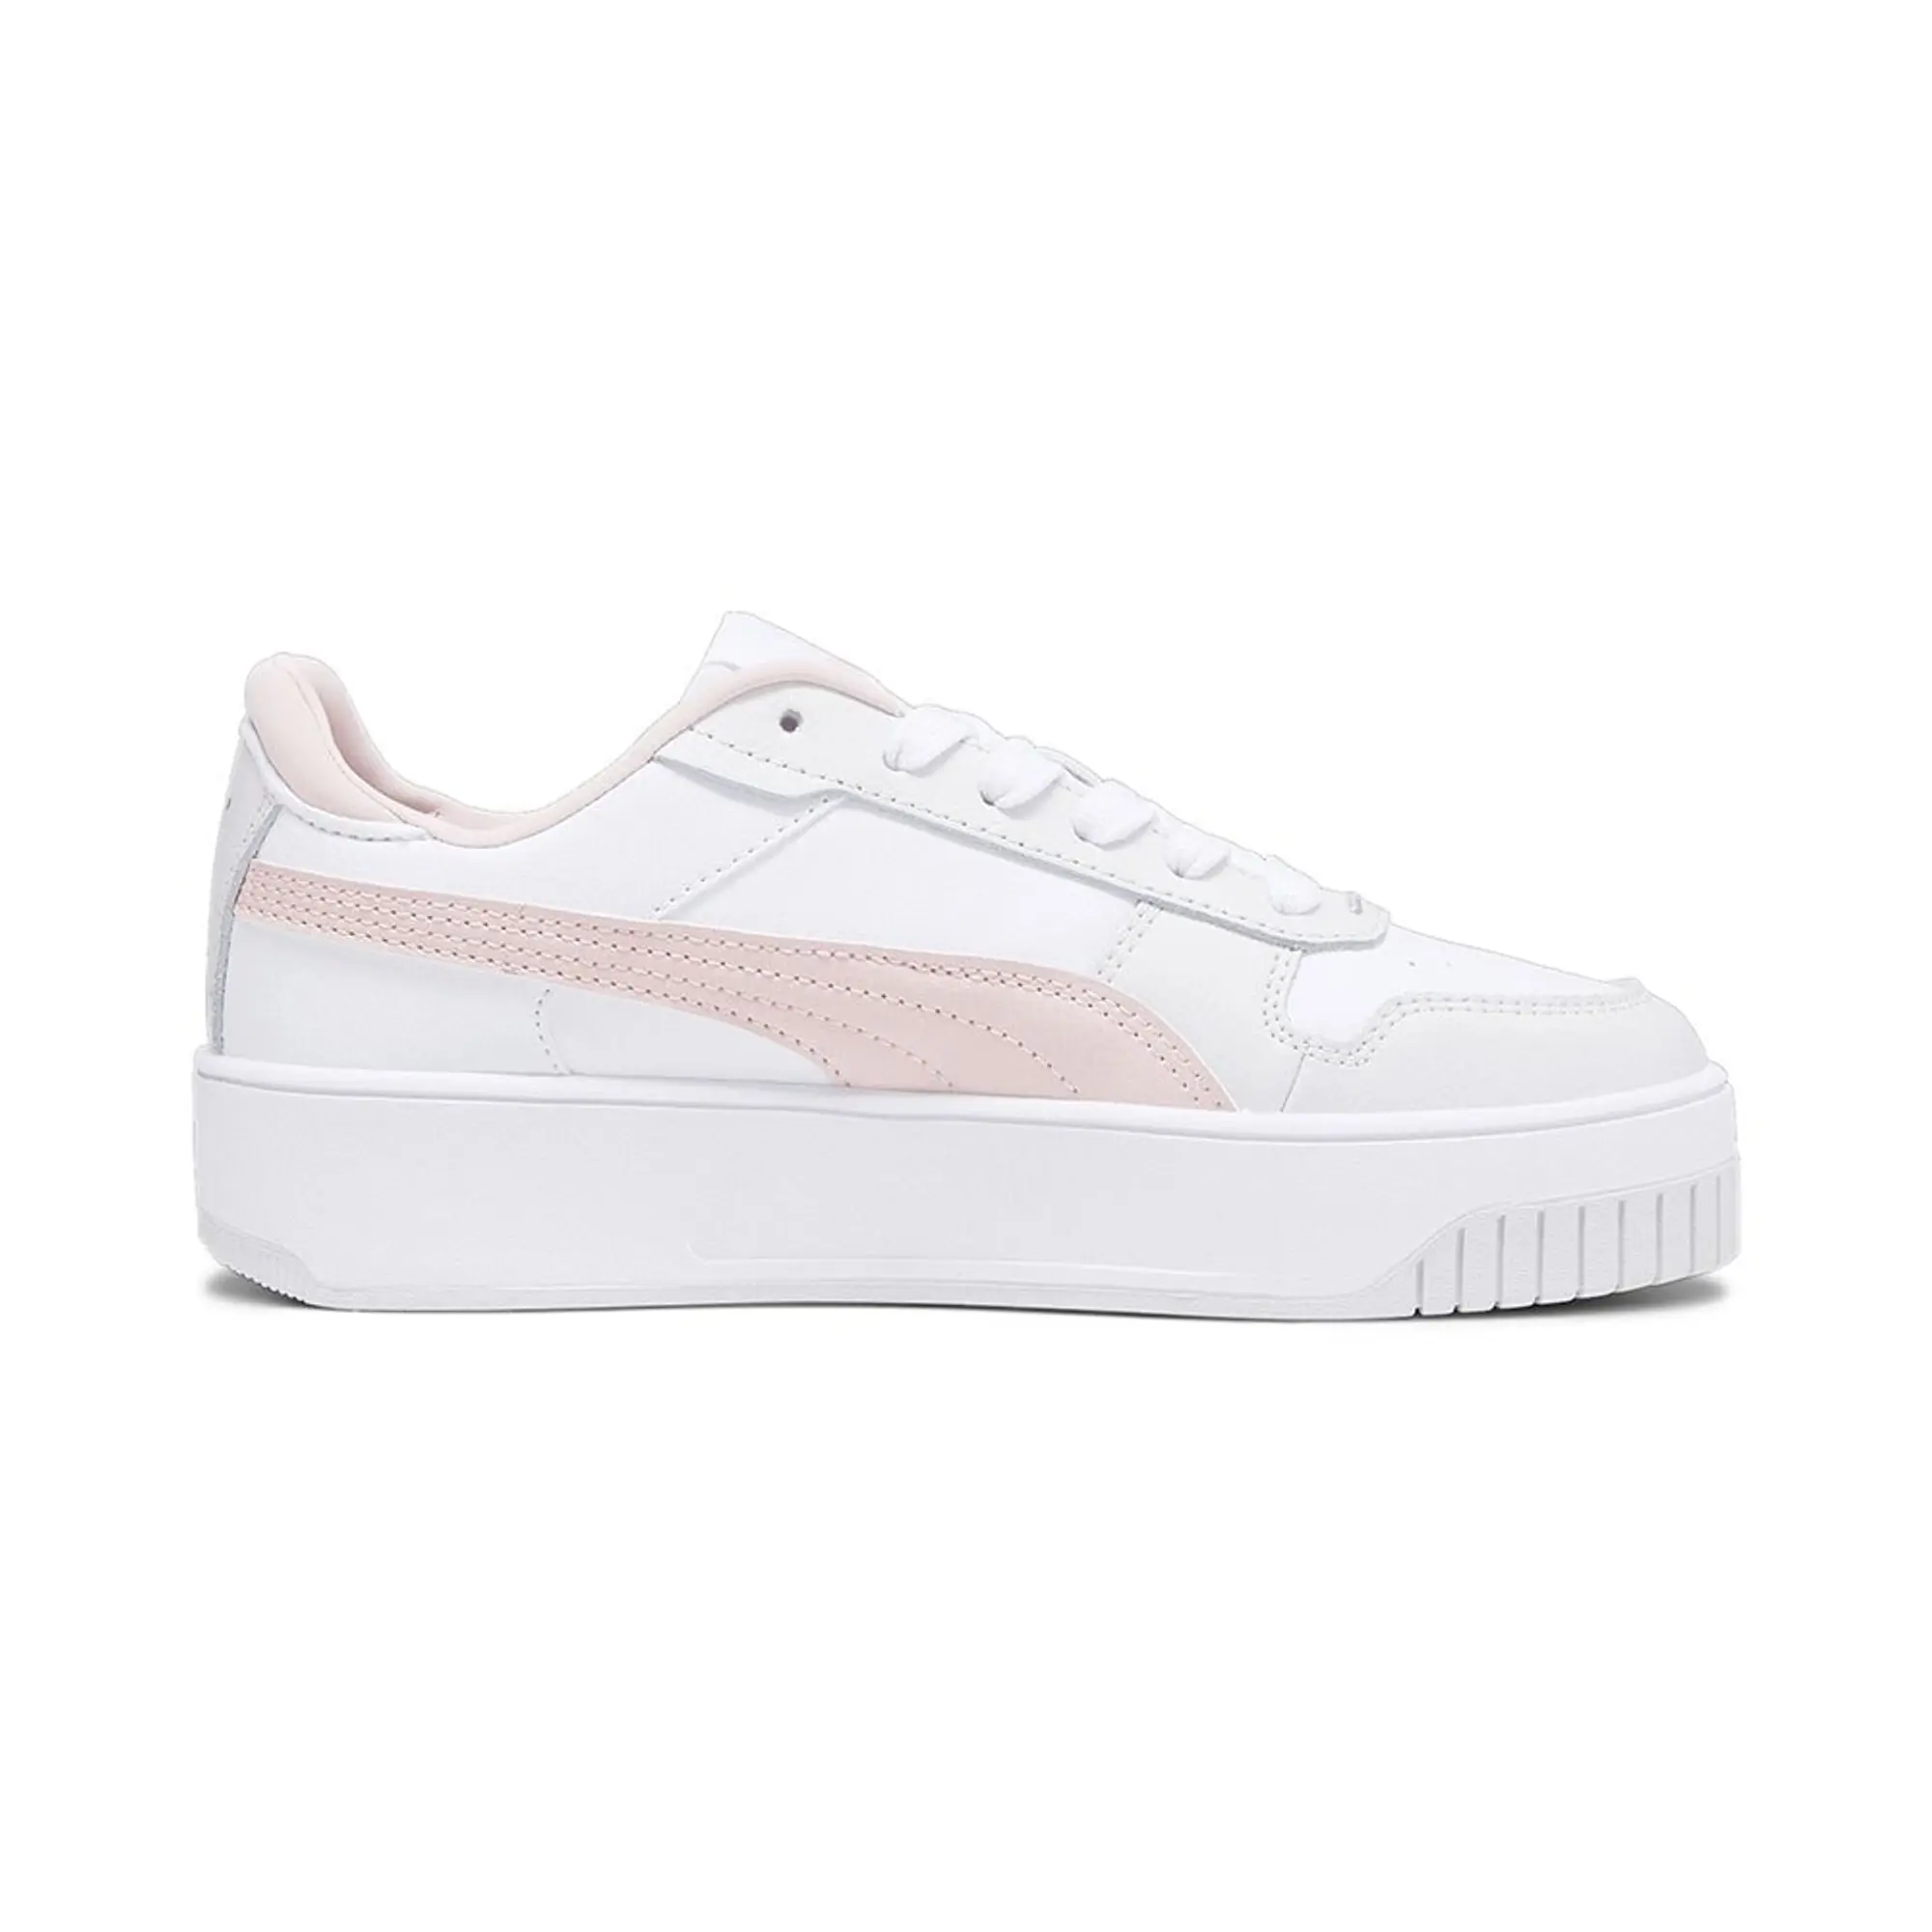 PUMA Carina Street Youth Sneakers, White/Rose Dust/Feather Grey ...